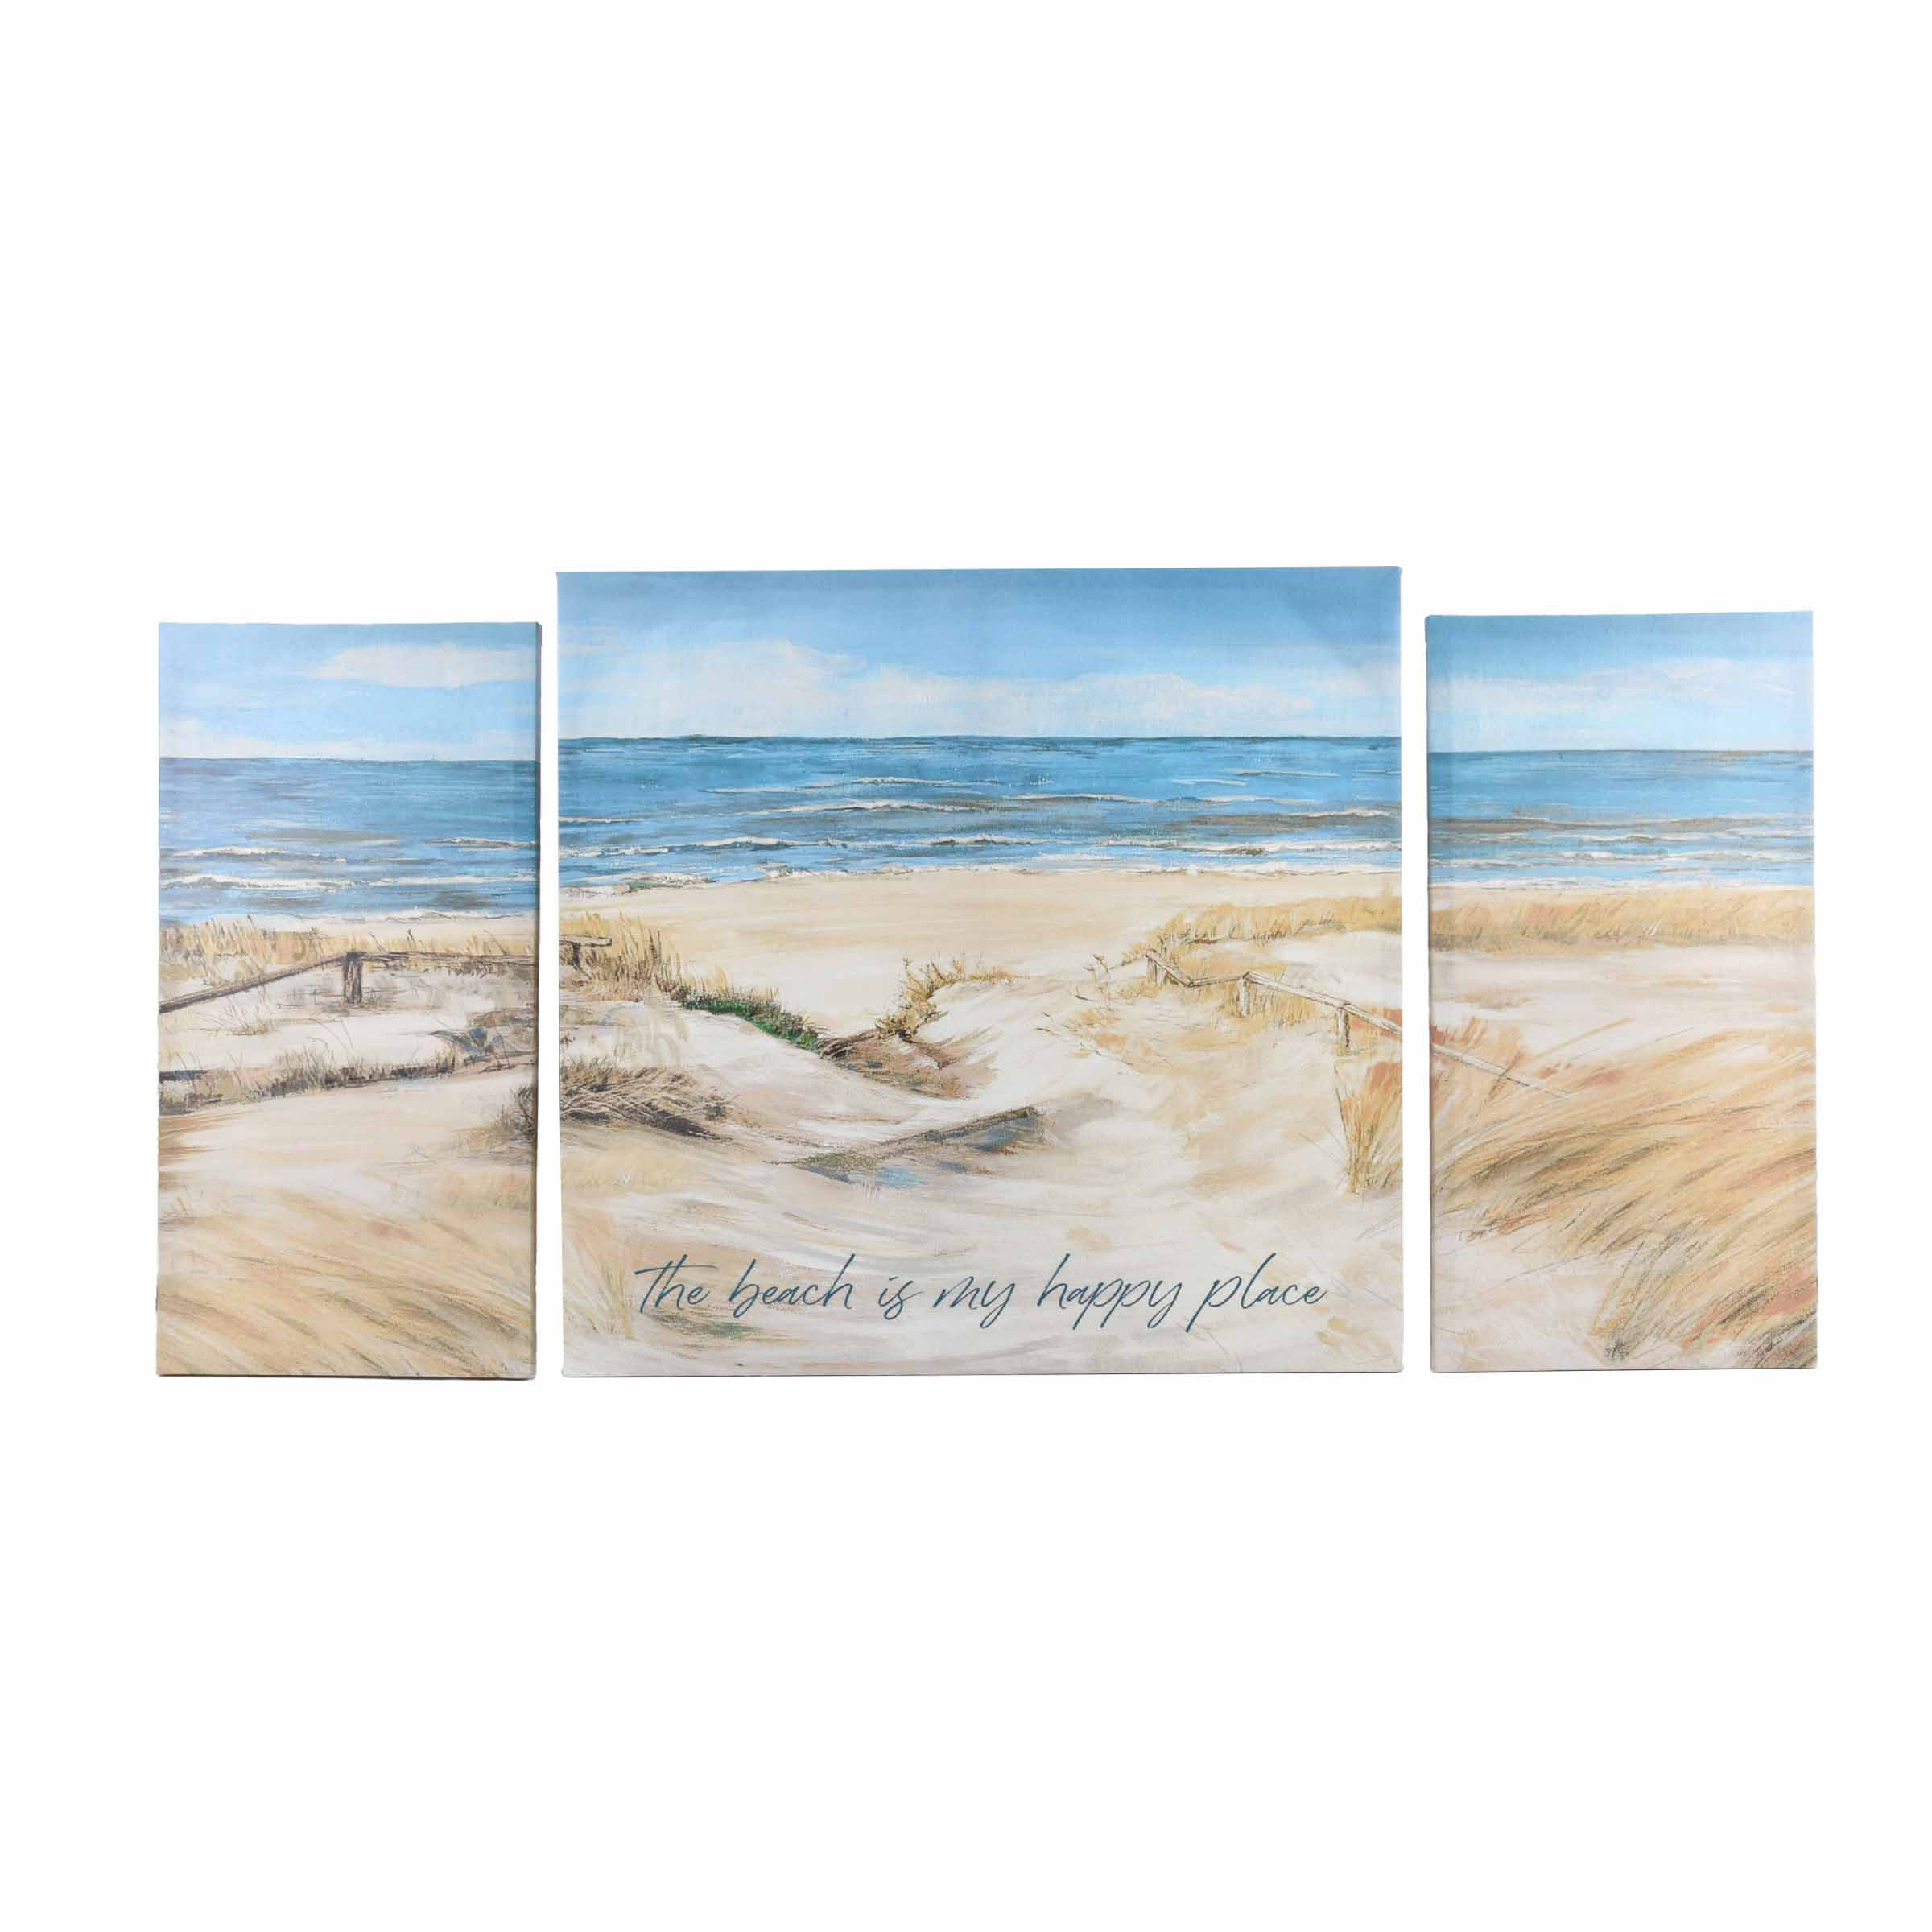 My Happy Place 6x6 inch Original Coastal Inspired Painting on Canvas with  painted sides